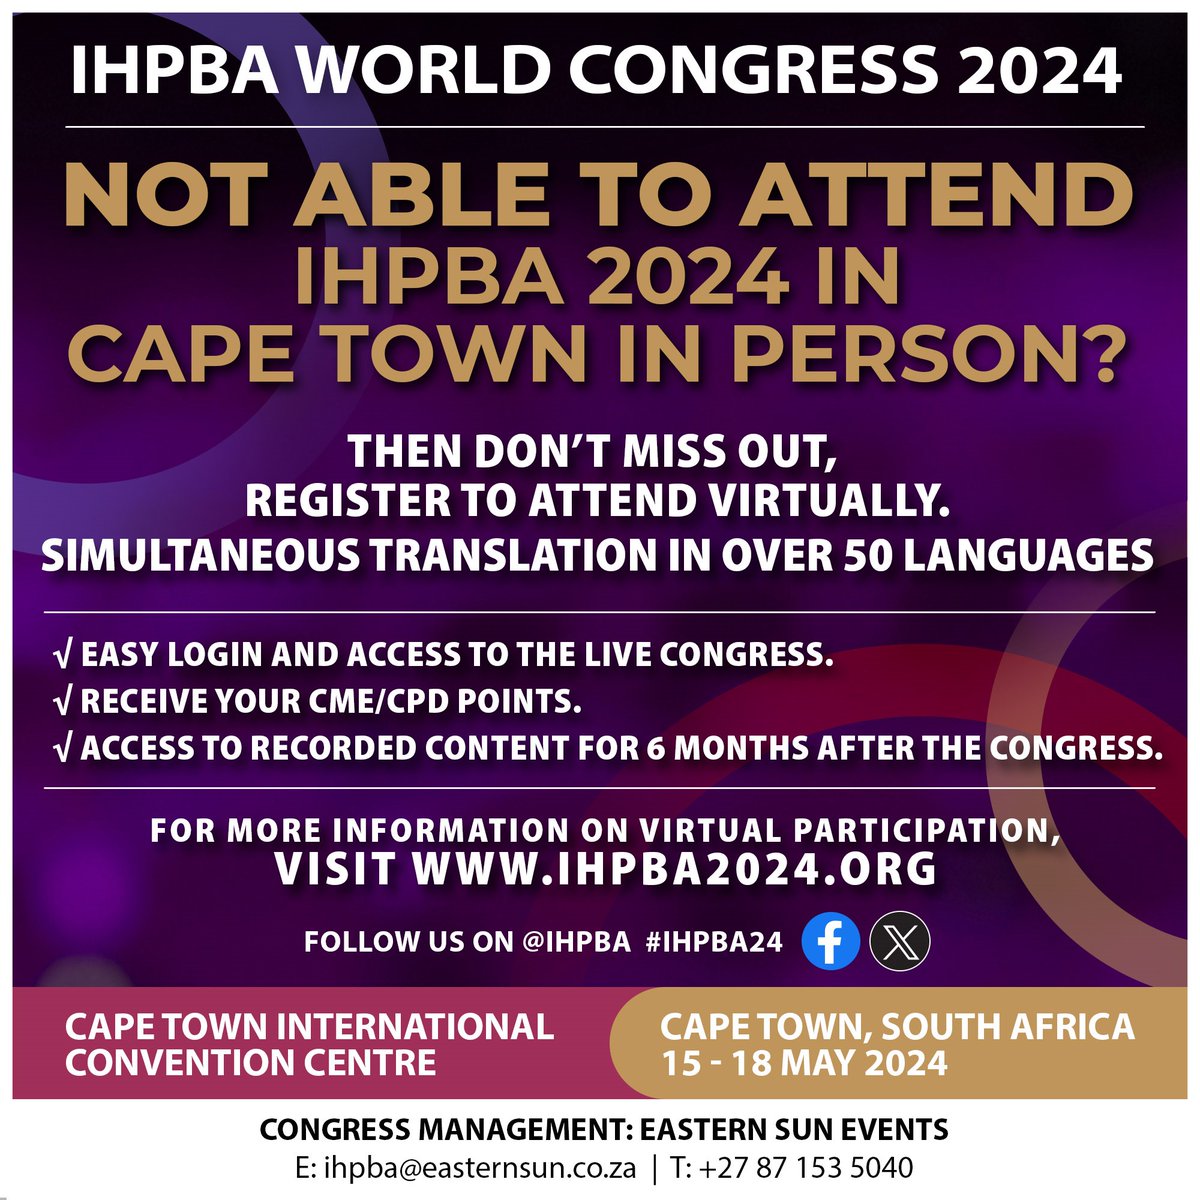 If you’re not able to attend IHPBA 2024 in person, then register to attend virtually. We are also offering simultaneous translation in over 50 languages. Visit ihpba2024.org and register today.